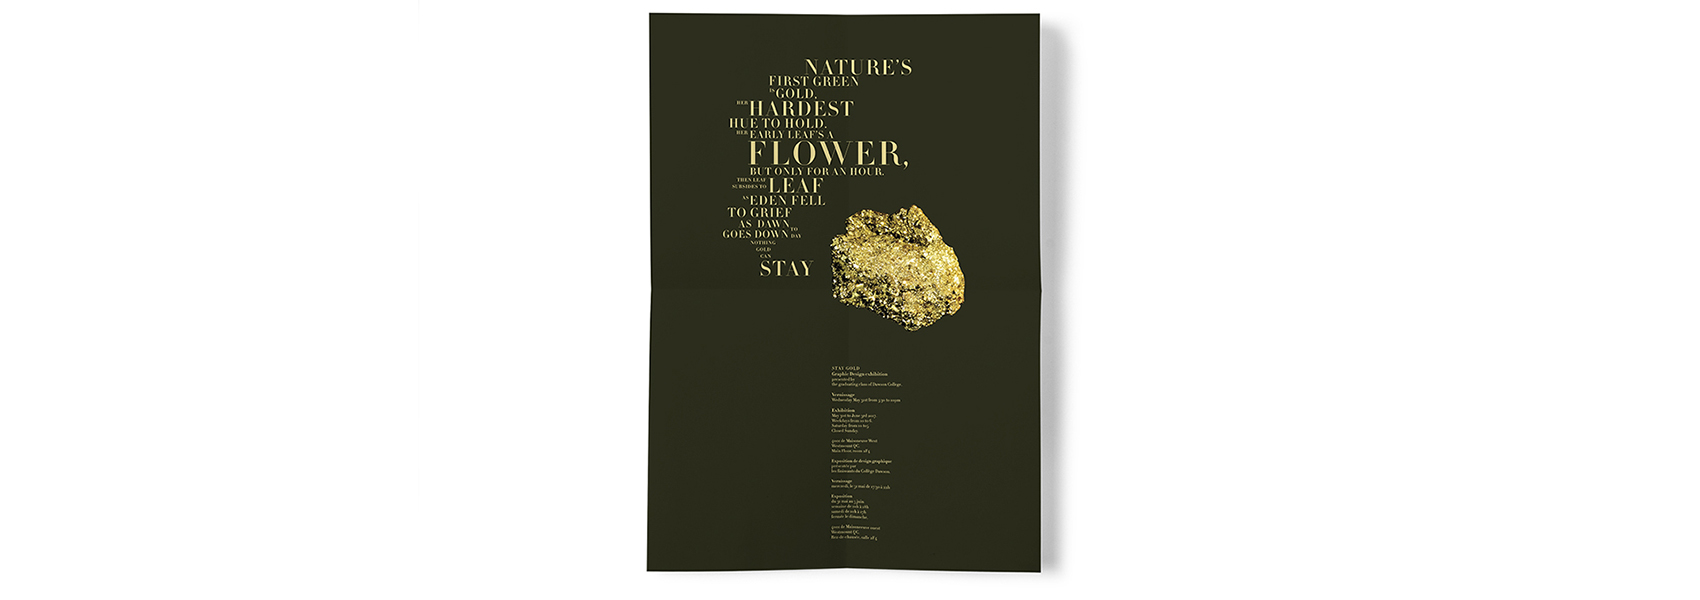 Image of Poster featuring Gold and a Robert Frost Poem